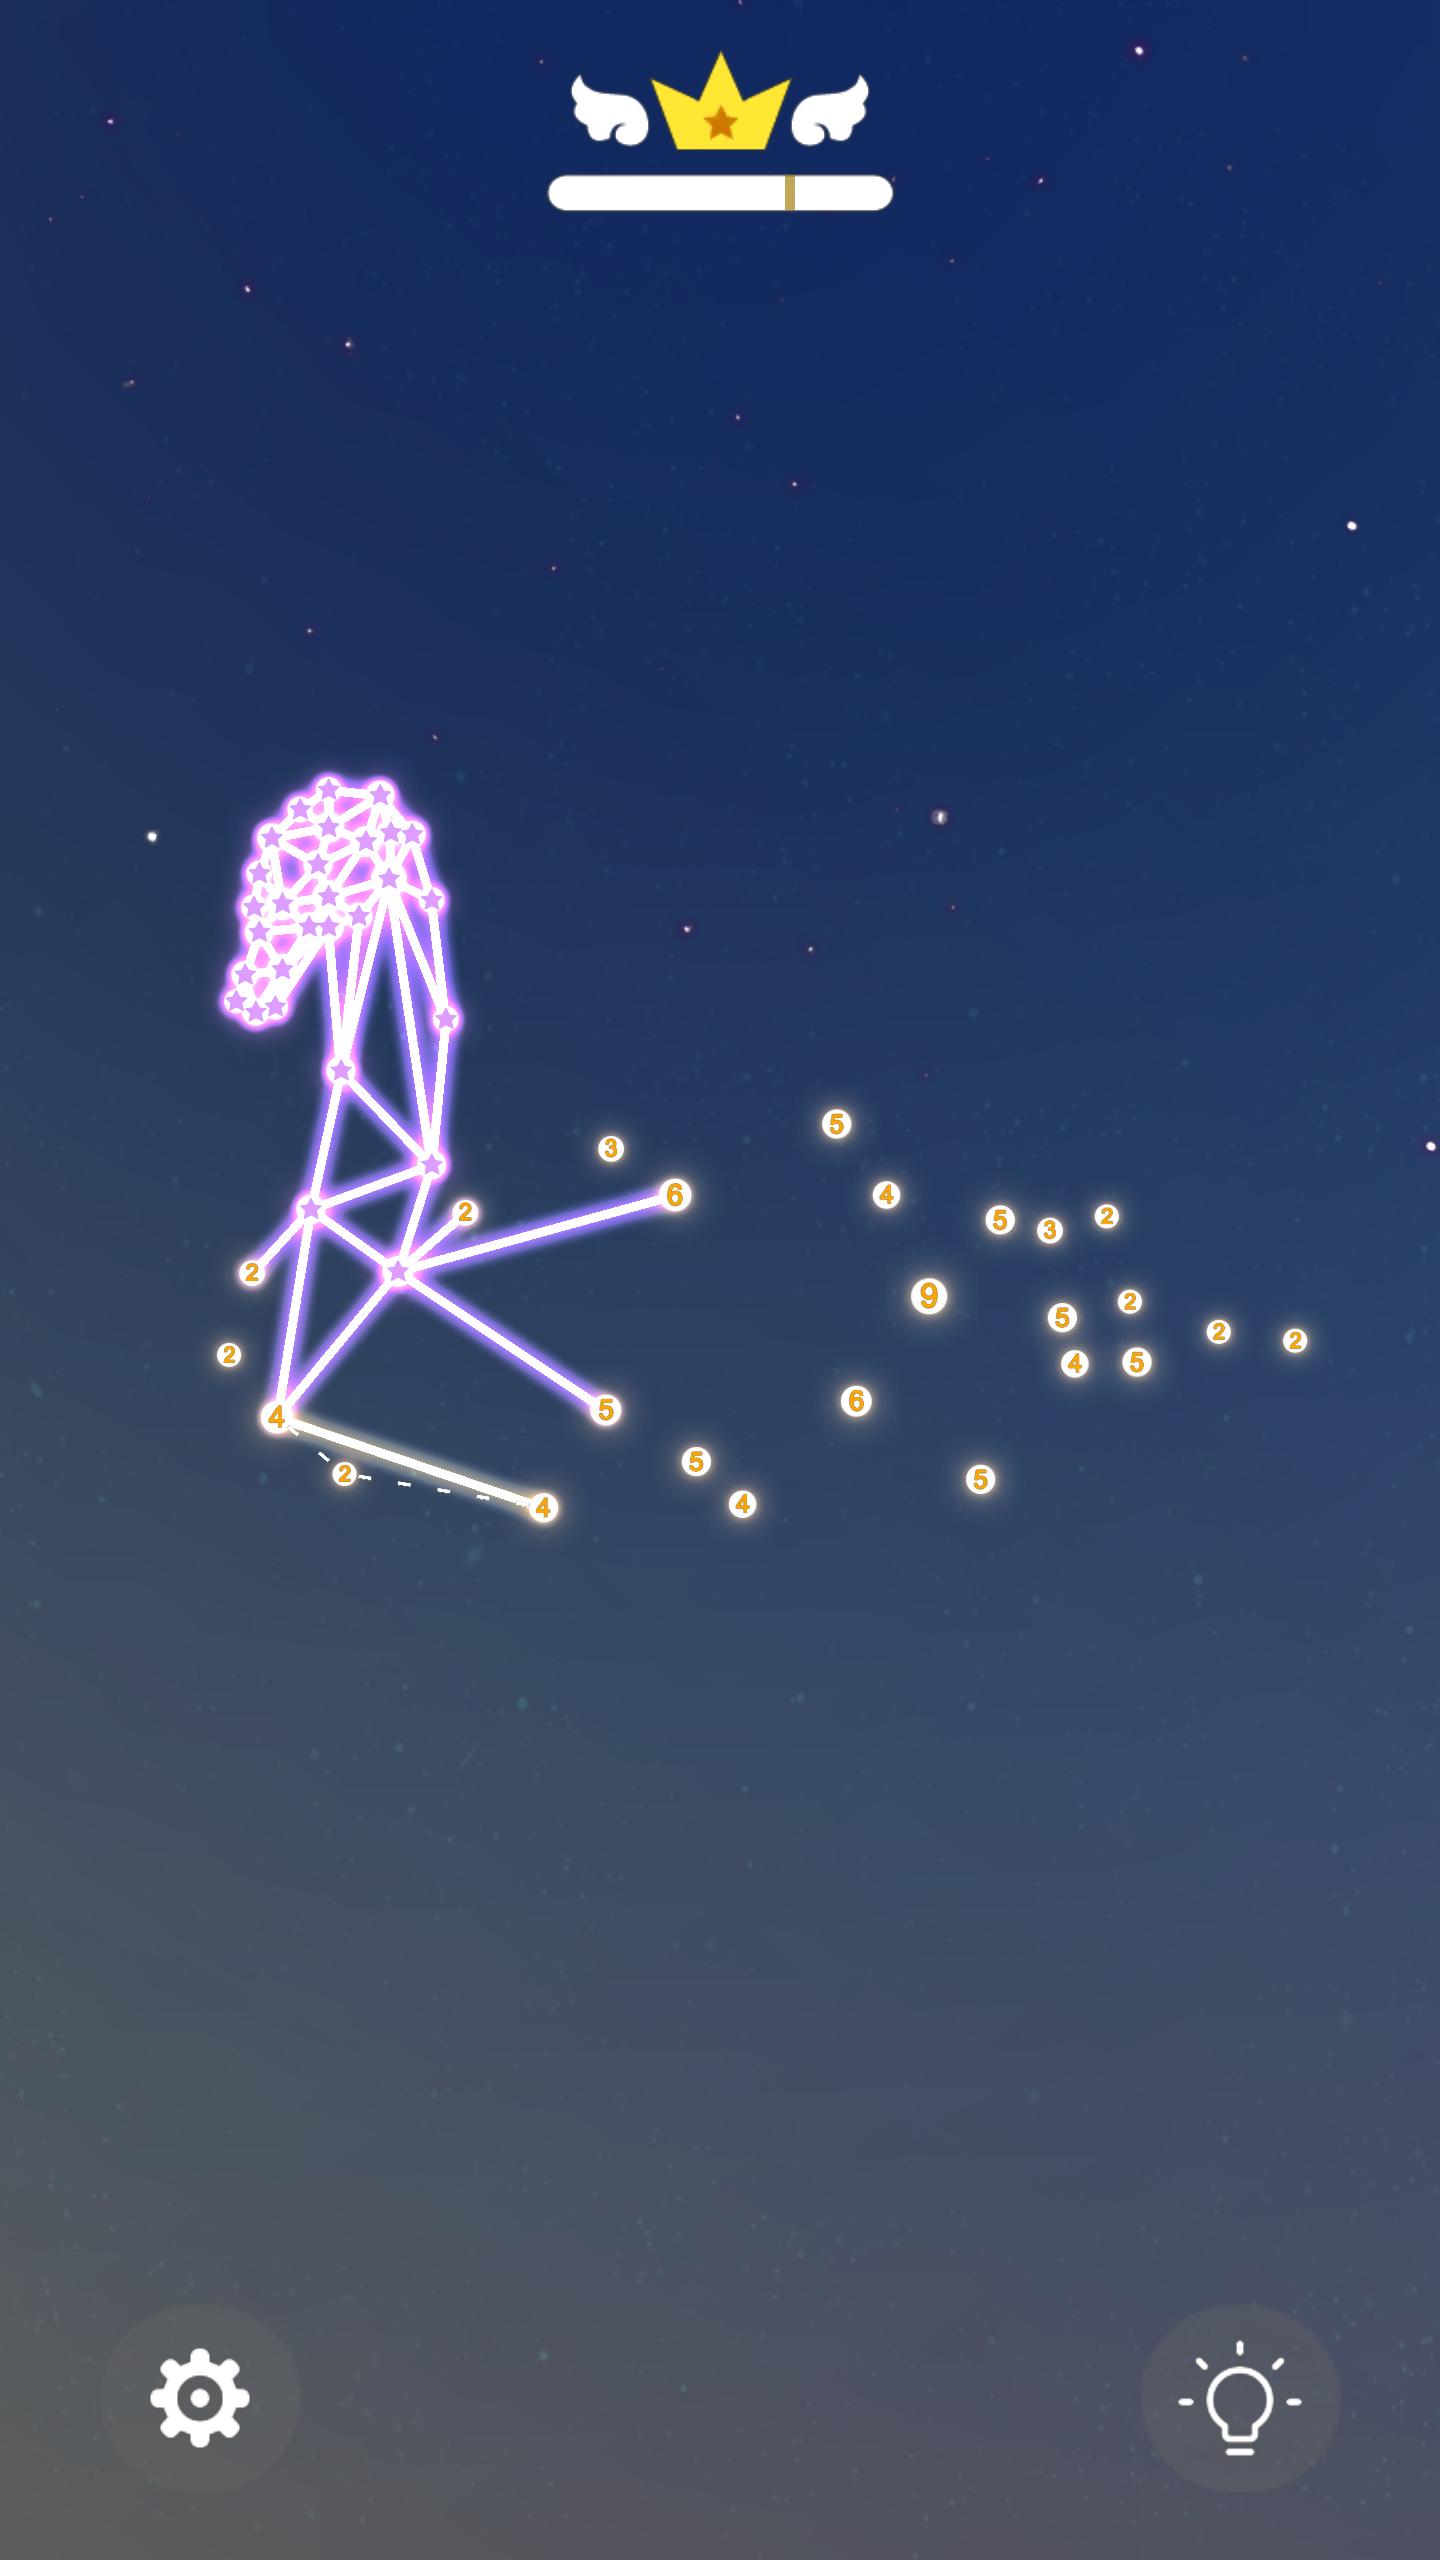 Linepoly Puzzle - Constellation games 1.2.3 Screenshot 5